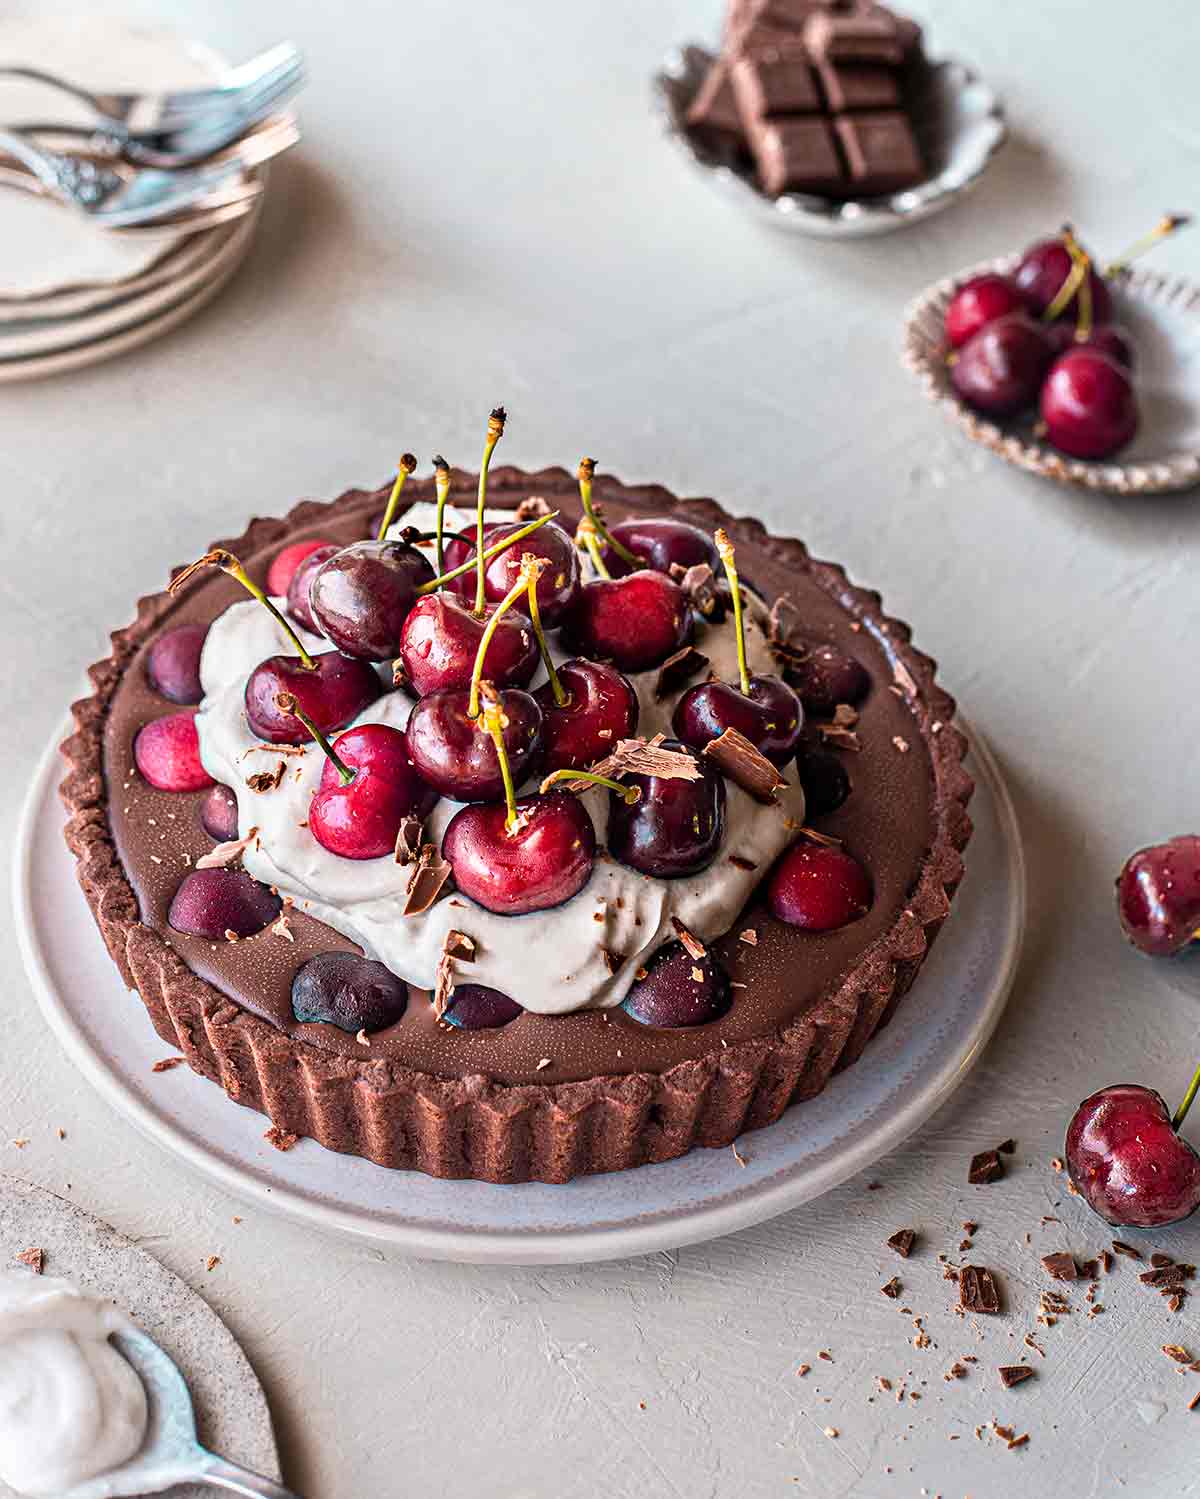 Vegan Black Forest tart with a chocolate base, ganache filling, coconut cream topping and lots of cherries on top.